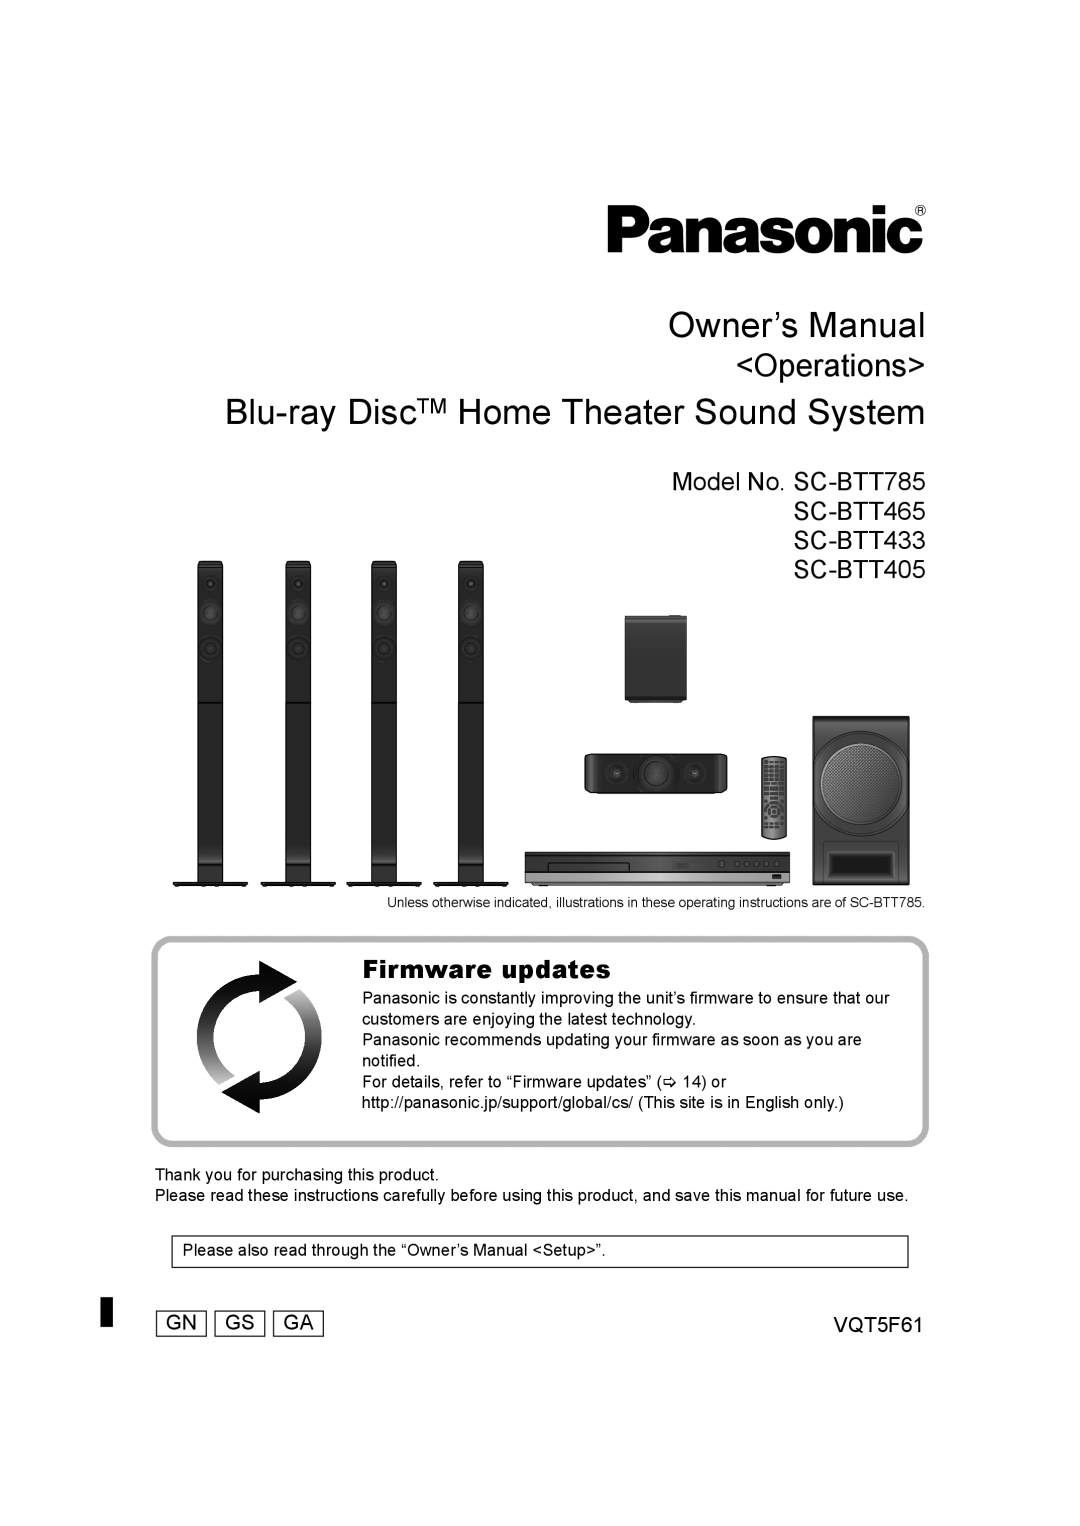 Panasonic SC-BTT465, SC-BTT405, SC-BTT785, SC-BTT433 owner manual Blu-ray DiscTM Home Theater Sound System 